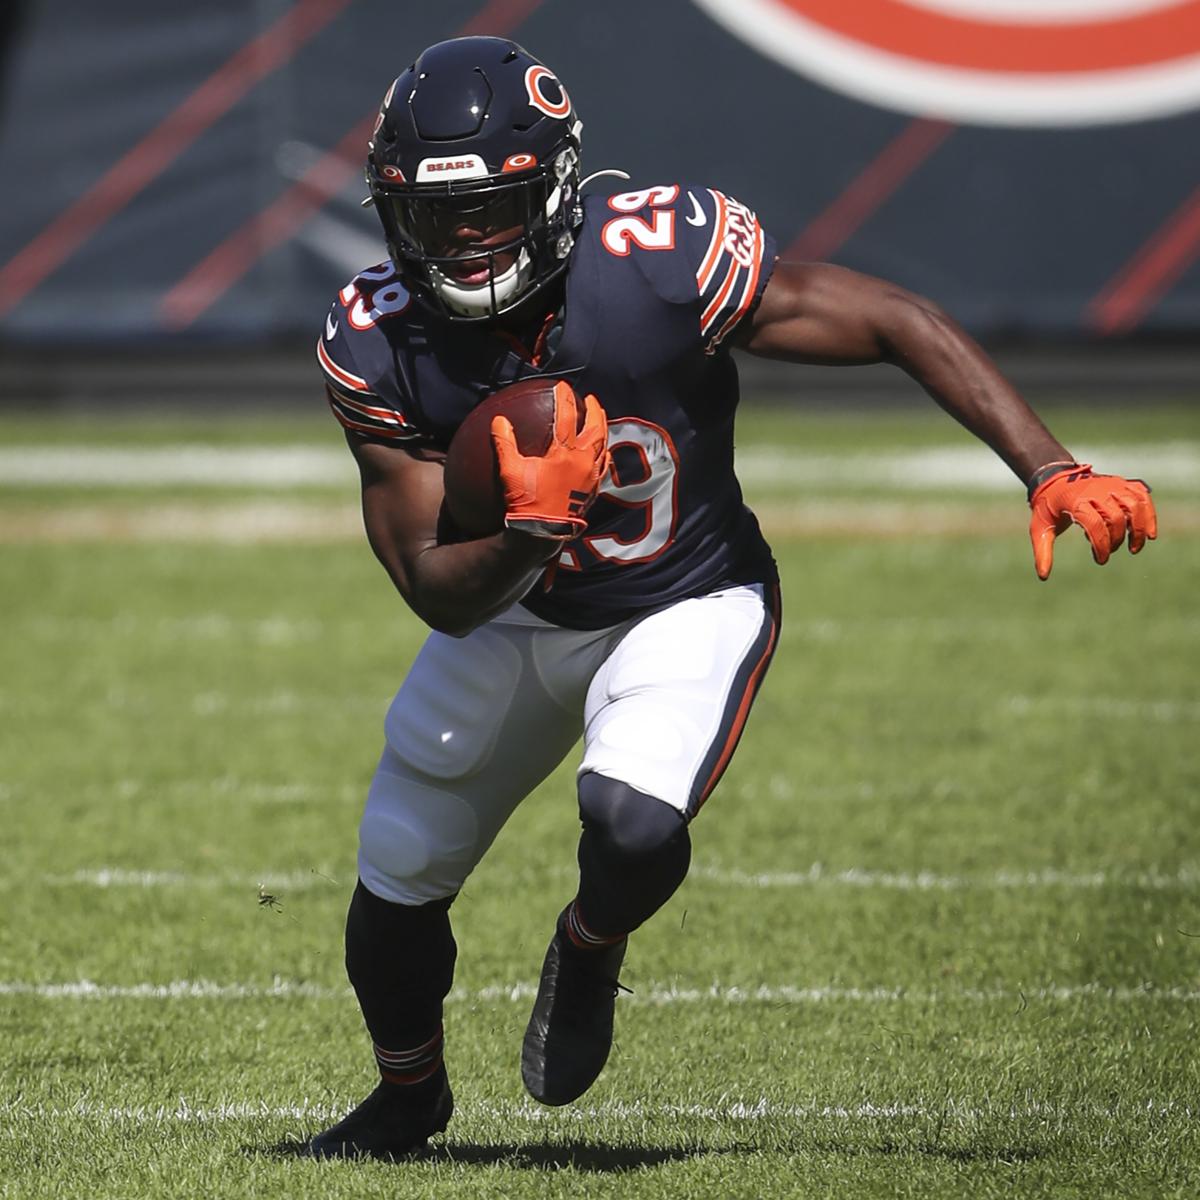 Tyrell Cohen, Brother of Bears RB Tarik, Found Useless at 25 in North Carolina